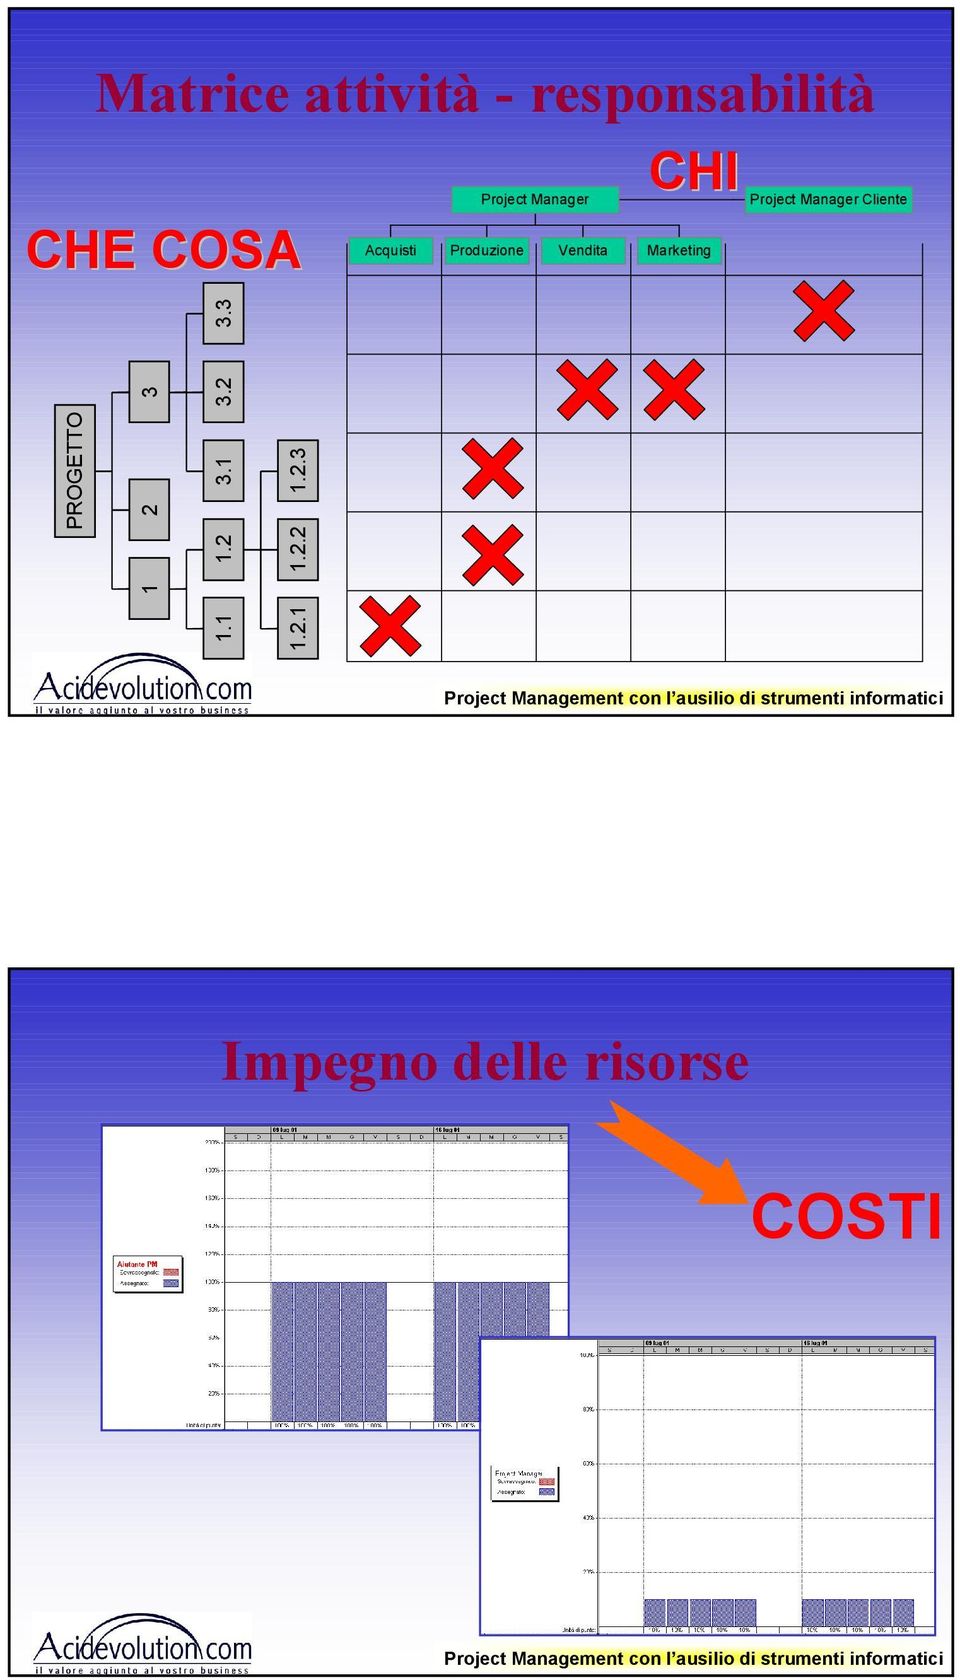 Project Manager Cliente PROGETTO 1 2 3 1.1 1.2 3.1 3.